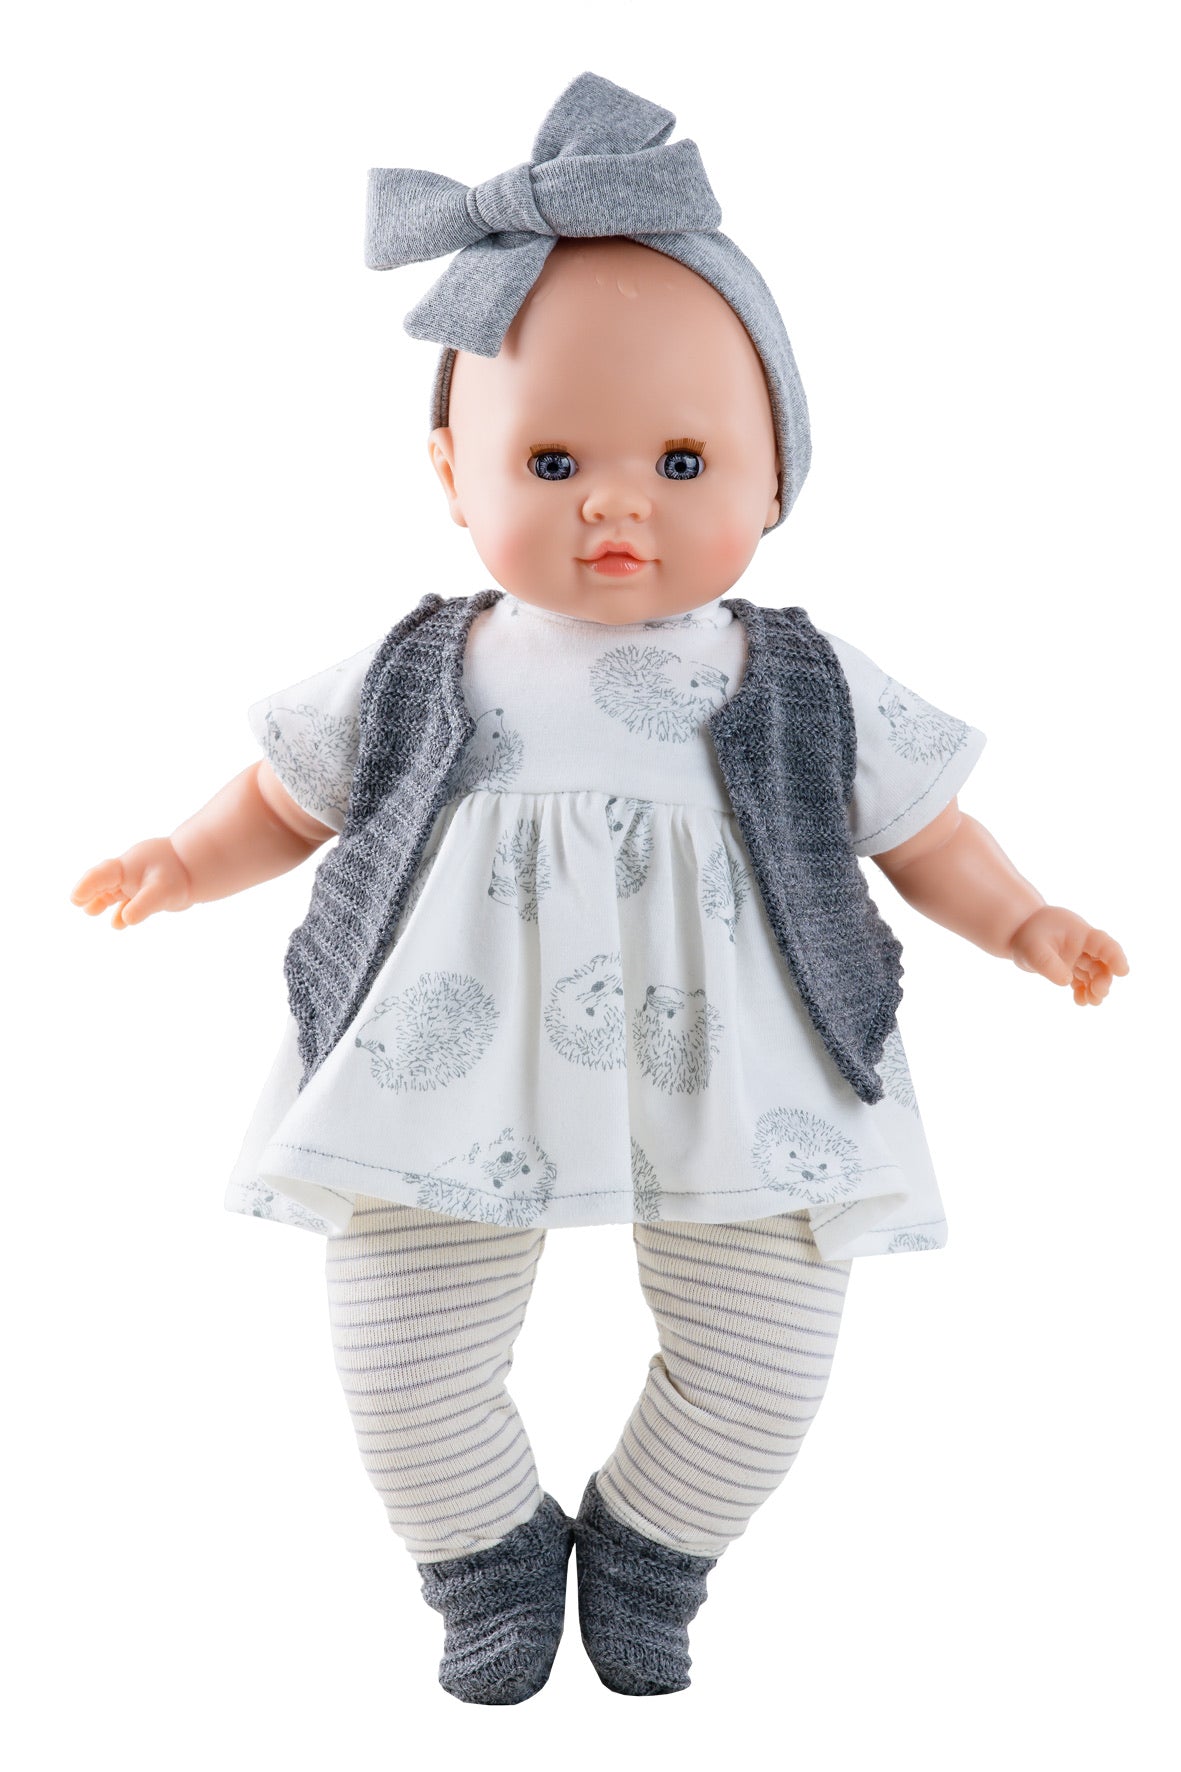 Paola Reina Agatha Soft Body Baby Girl Doll with Outfit